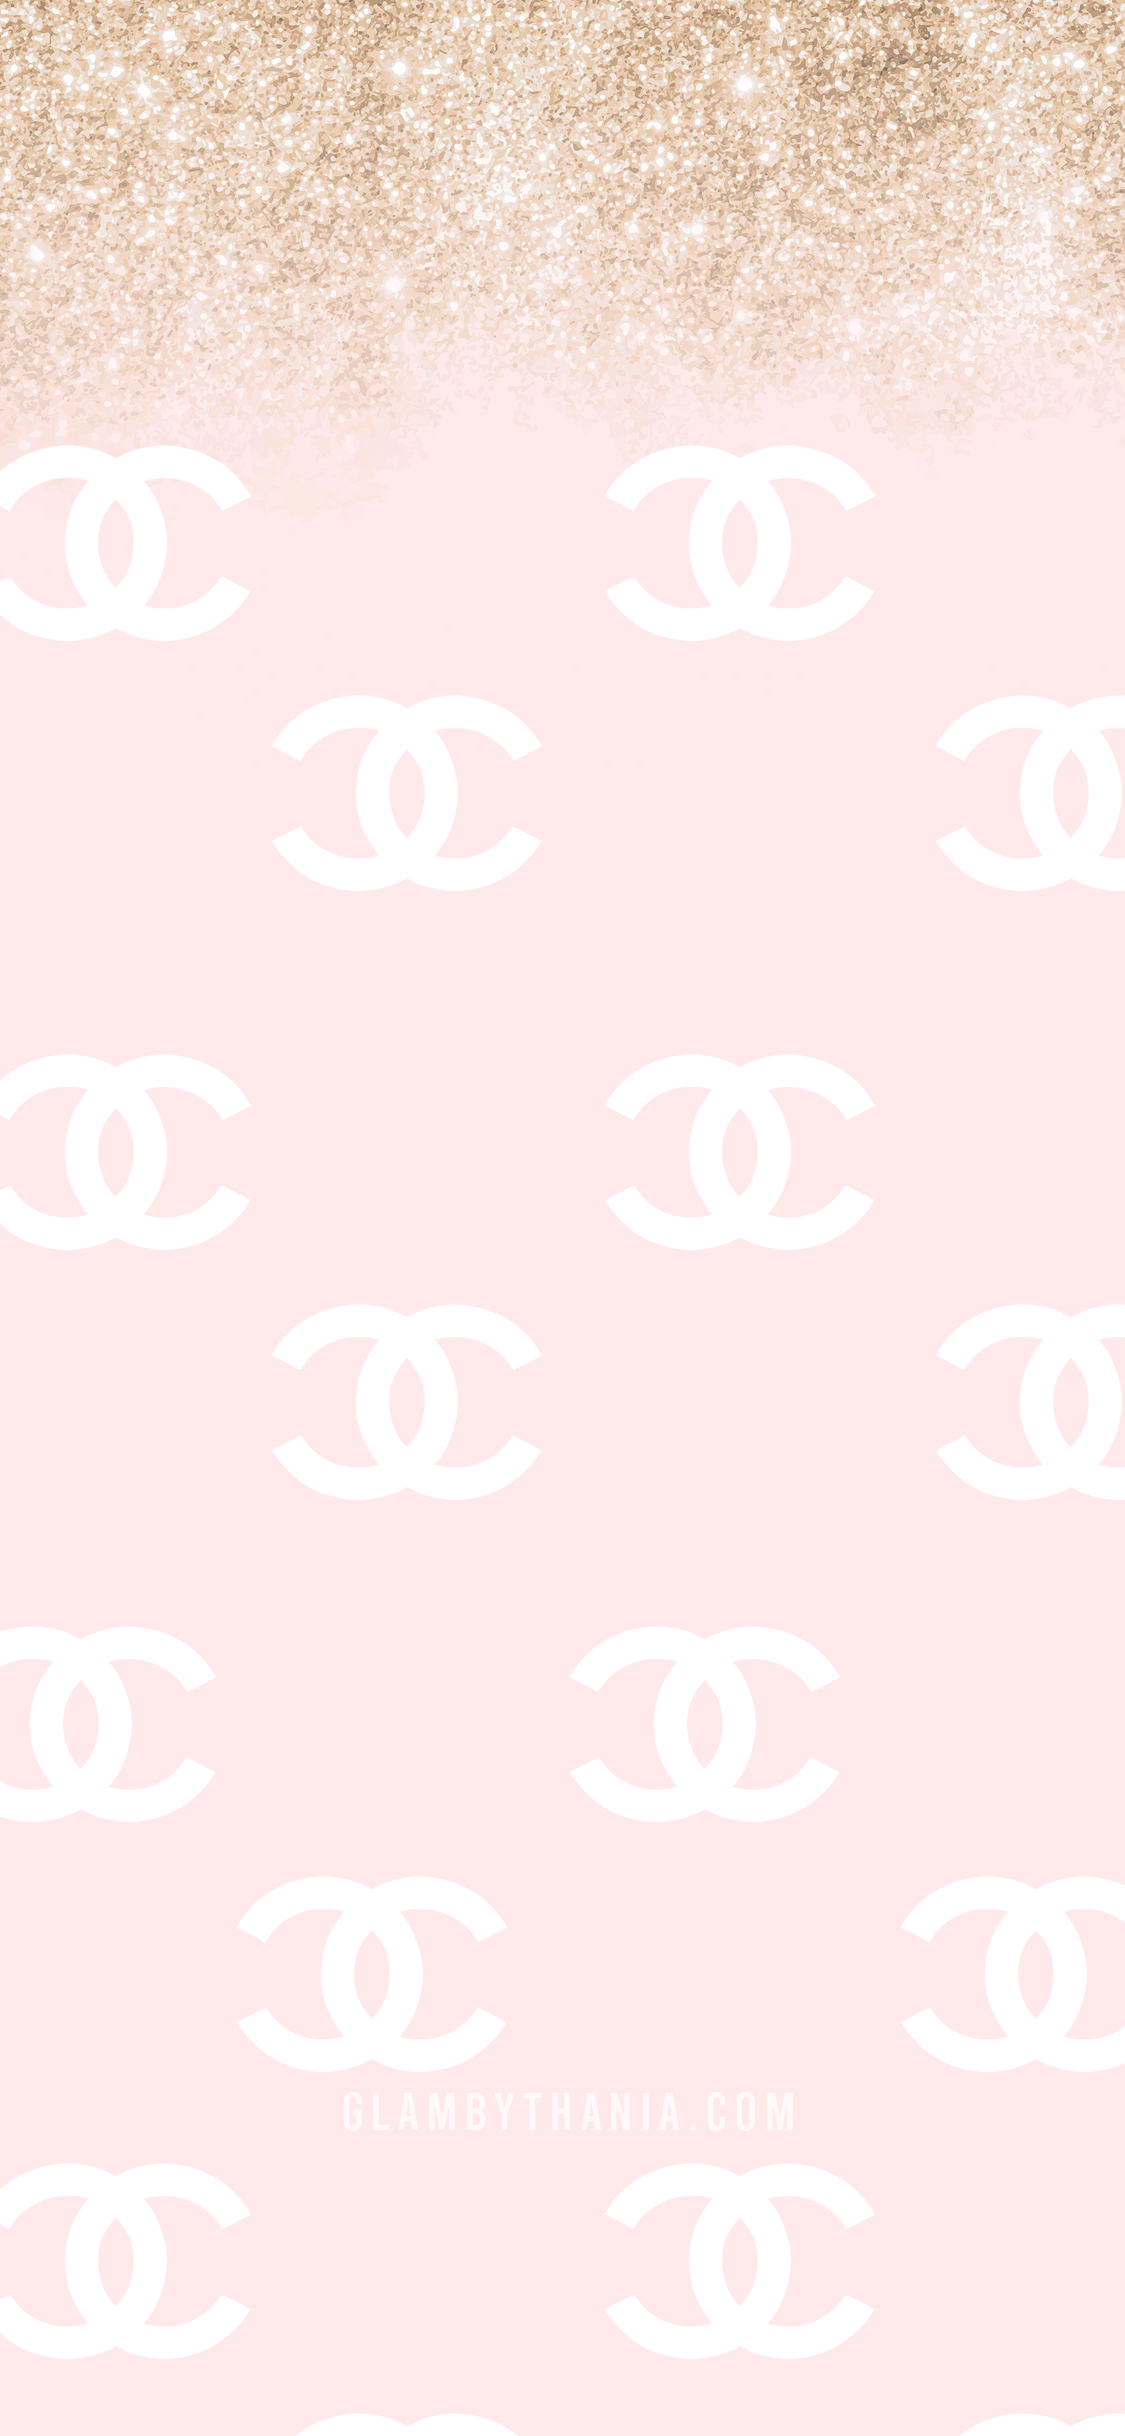 Download Latest HD Wallpapers of  Abstract Pink Chanel Pattern